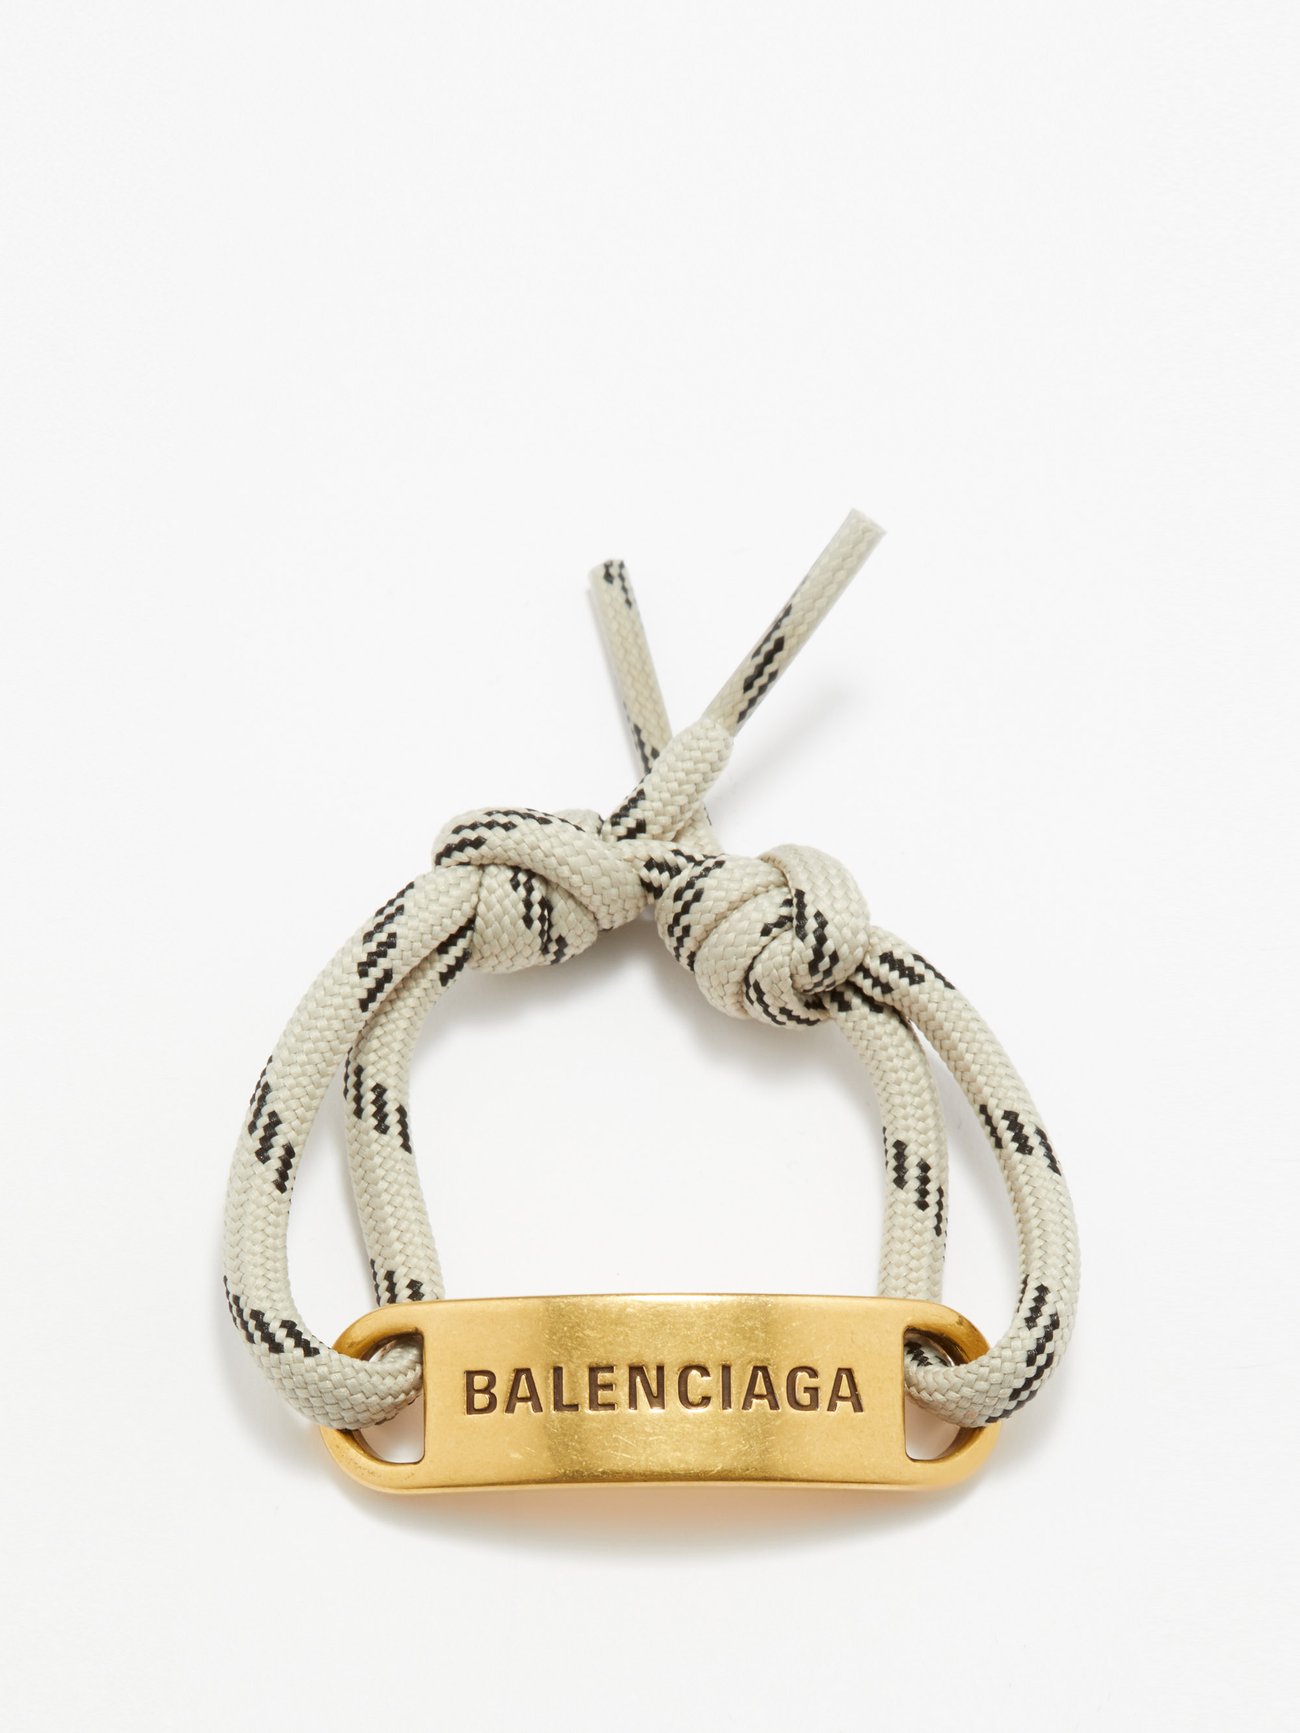 Luxurious Balenciaga Tool Bracelet in Silver with Cool Bolt Detail  Tuvie  Design